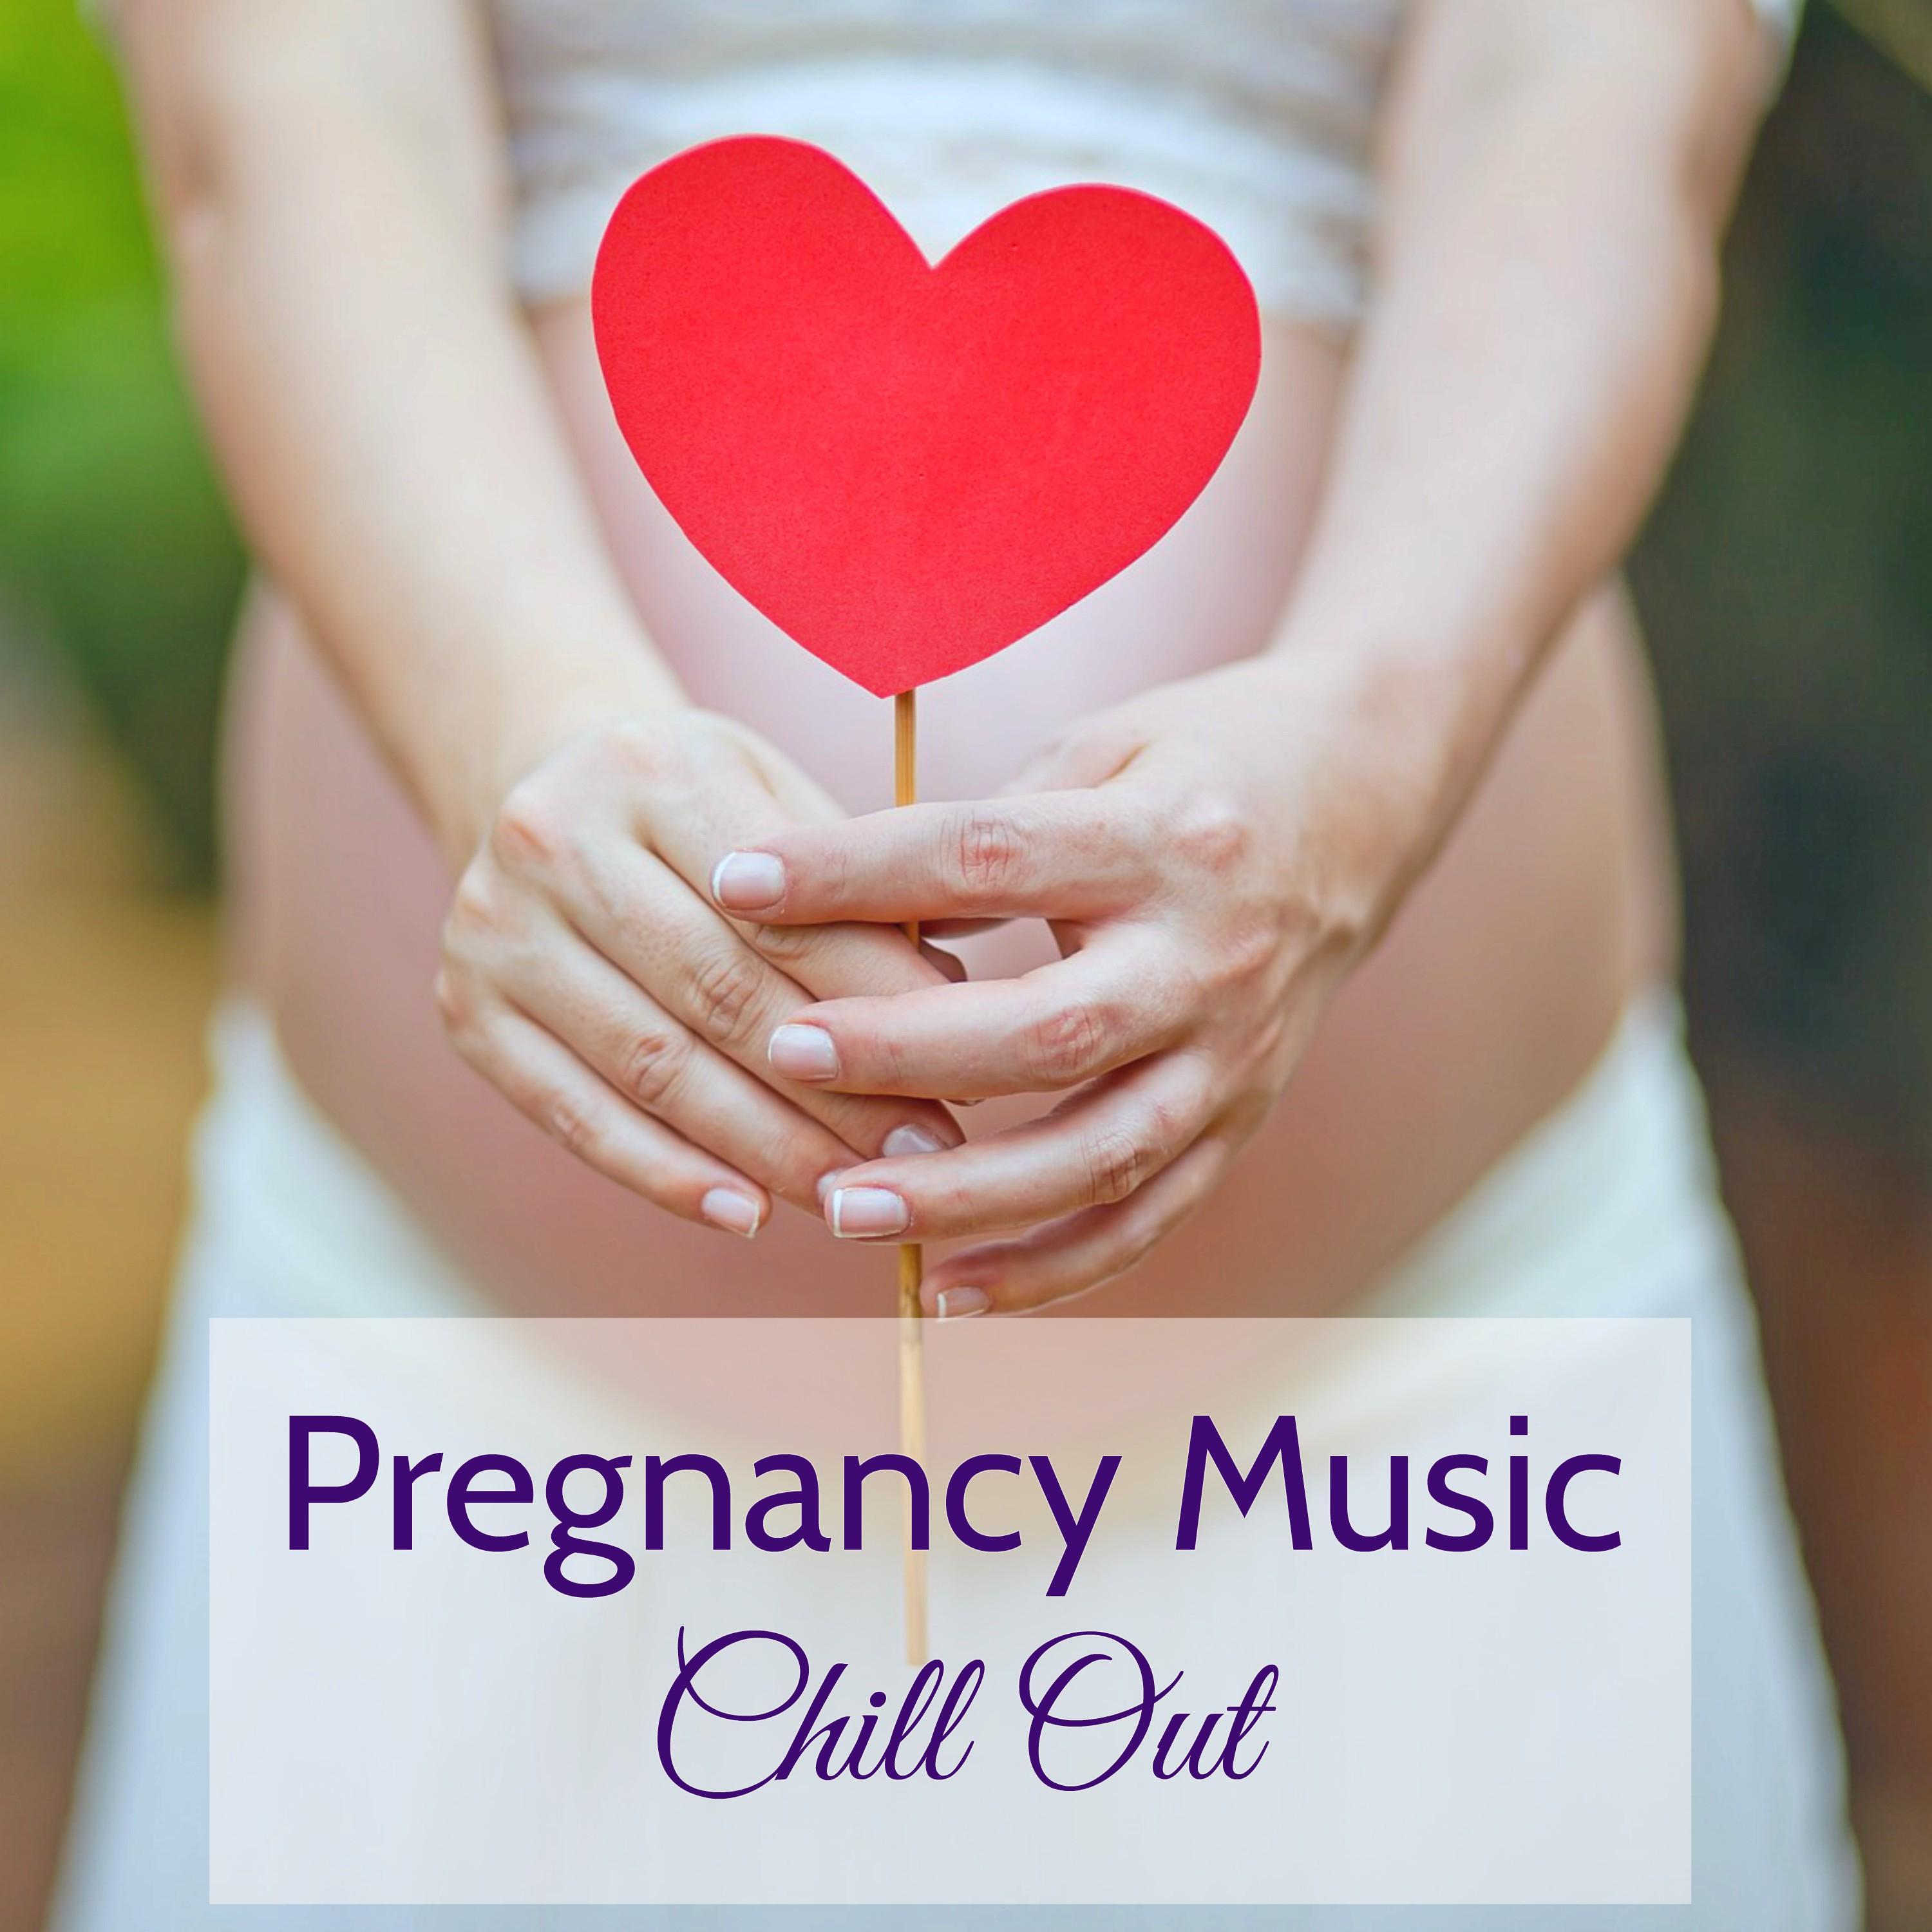 Pregnancy Music Chill Out  Nine Months Wonderful Chill Out Music, Sound of the Sea for Deep Relaxation and Prenatal Yoga